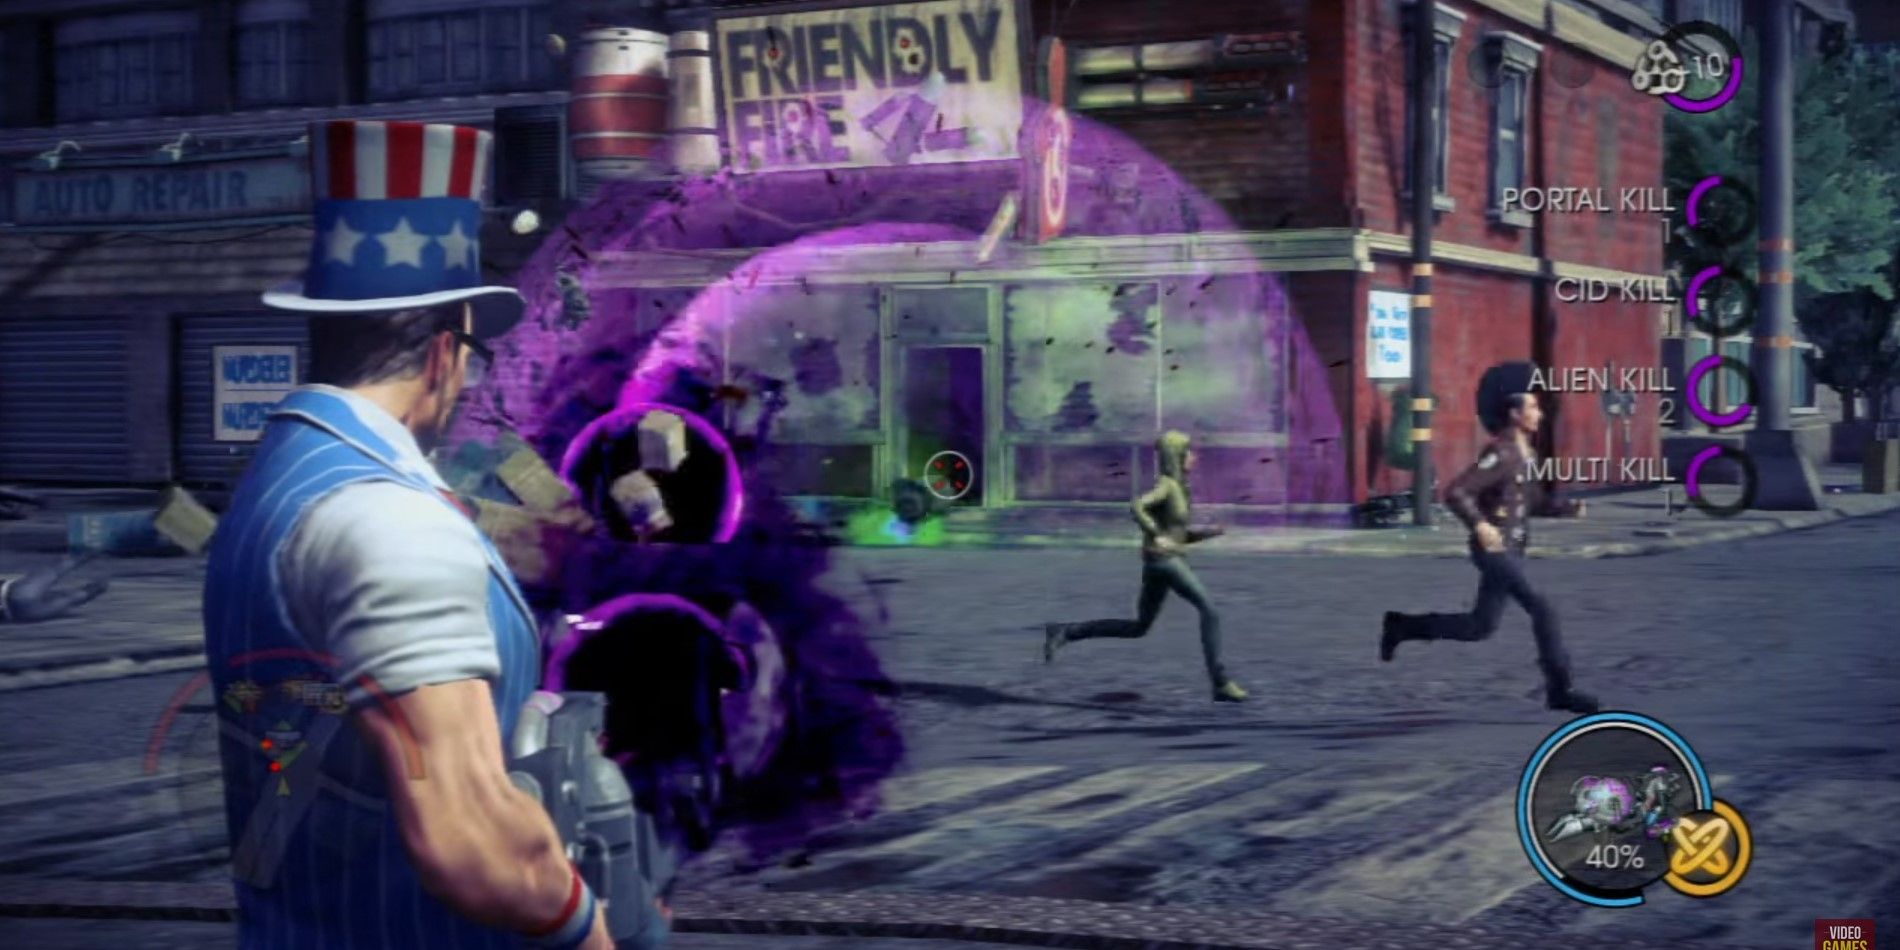 The president dressed as uncle same shoots a dubstep gun at enemies in Saints Row IV